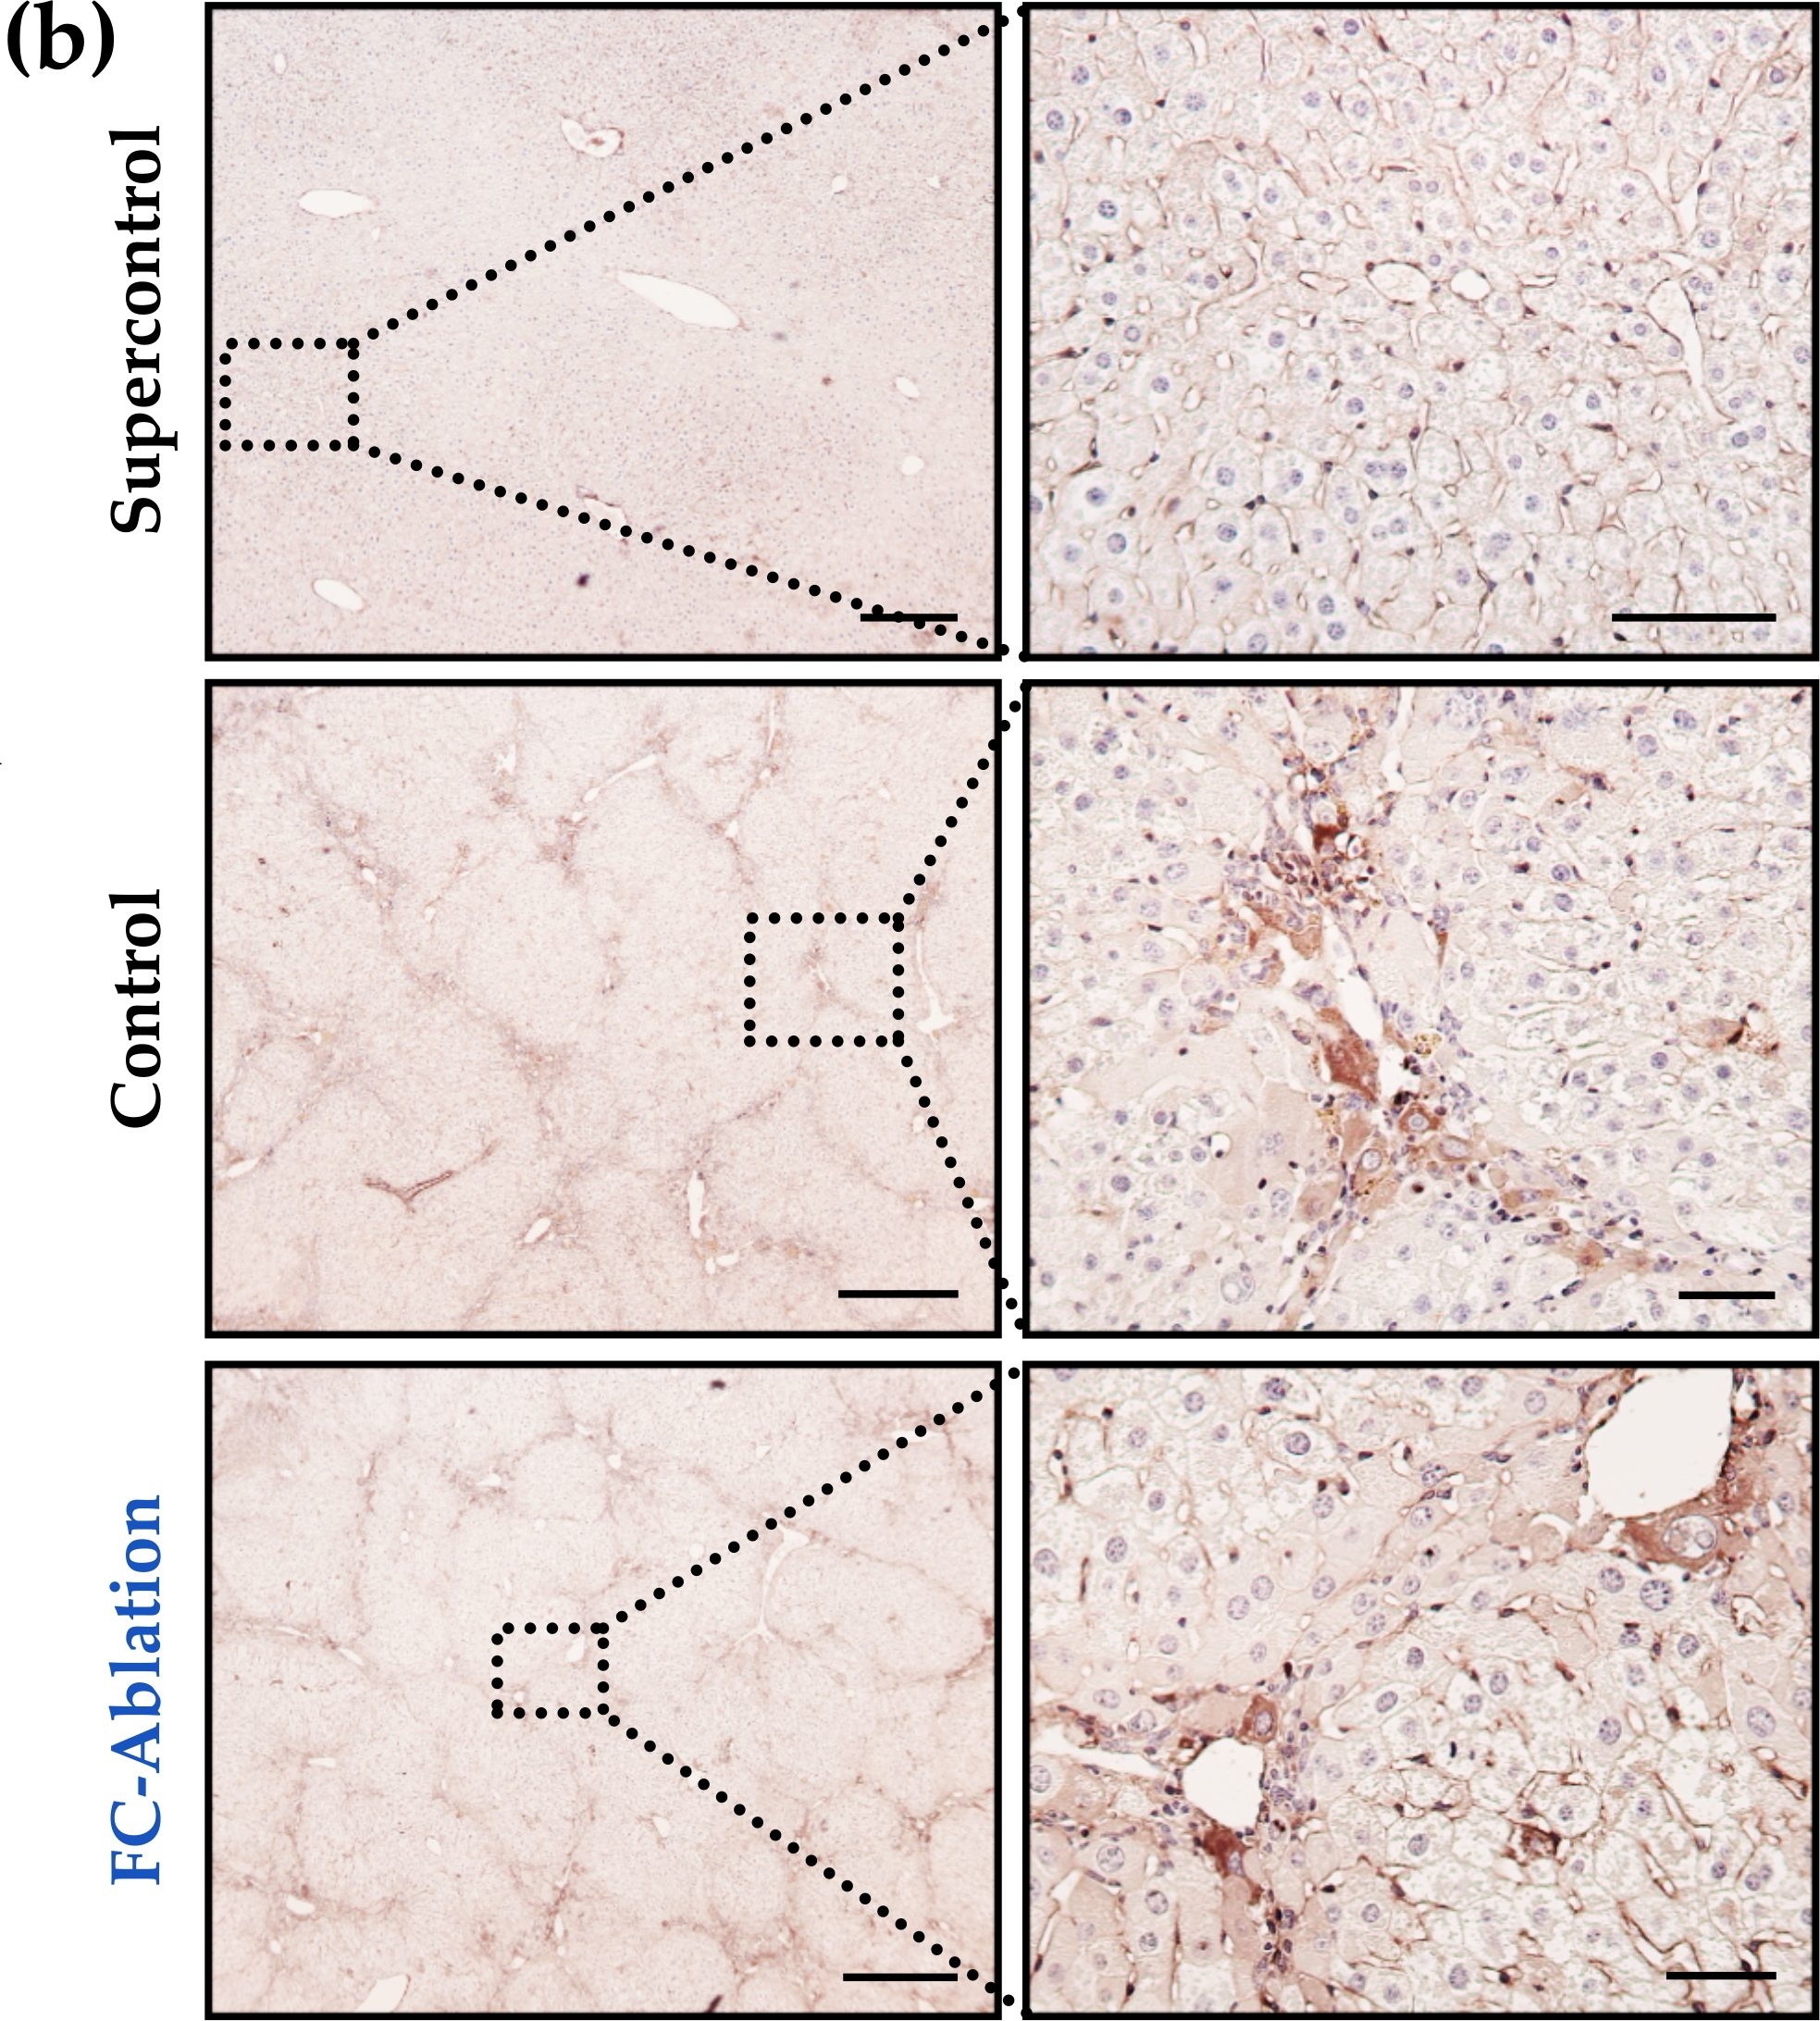 Depletion of Bone Marrow-Derived Fibrocytes Attenuates TAA-Induced Liver Fibrosis in Mice.